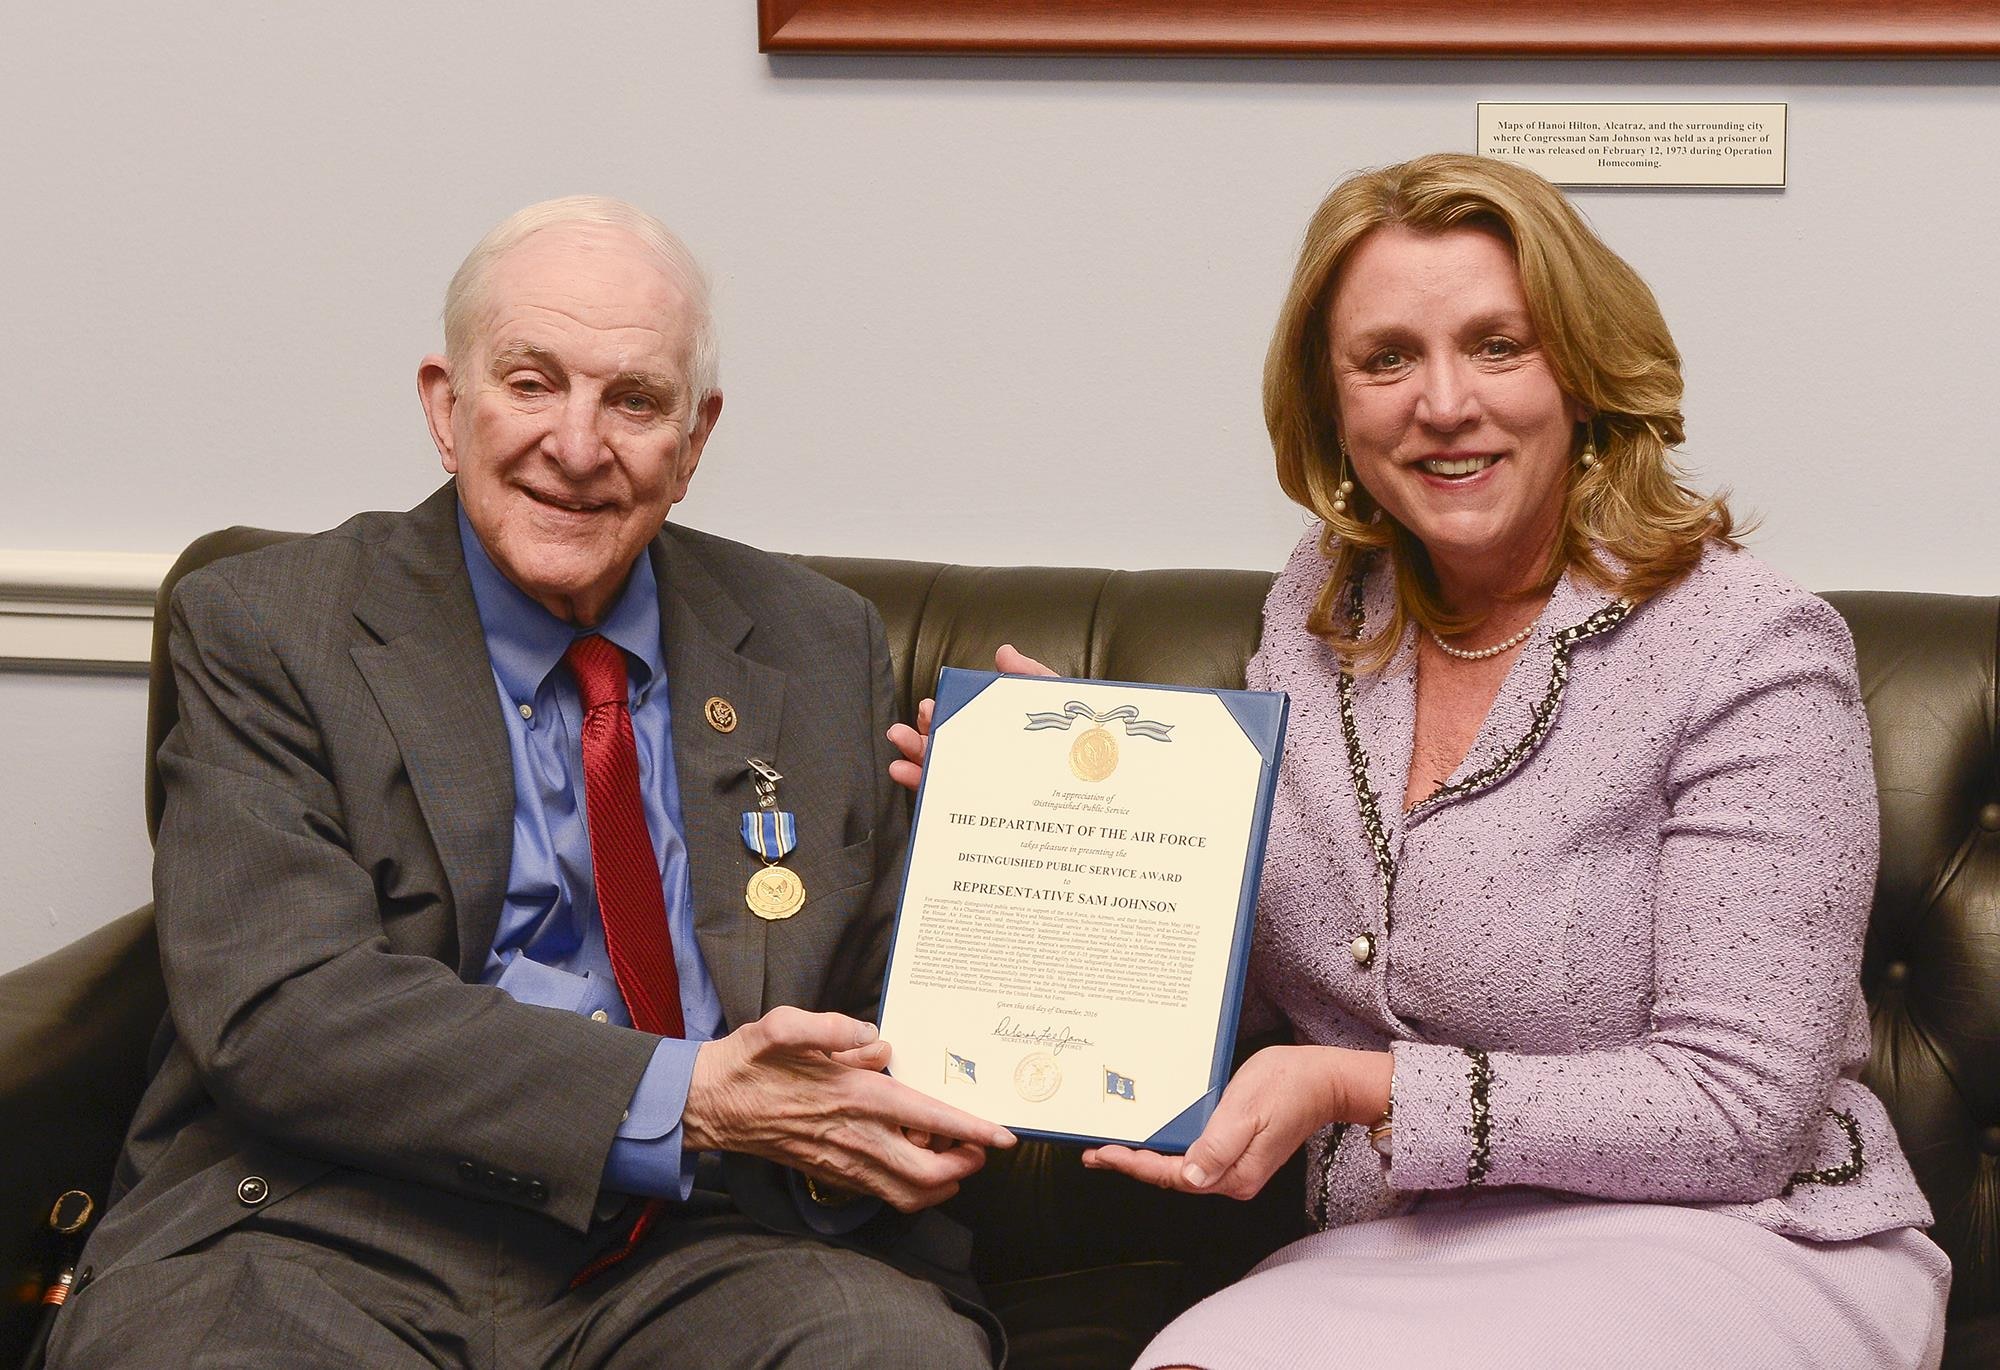 Air Force Secretary Deborah Lee James presents the Distinguished Public Service Award to U.S. Rep. Sam Johnson (R-TX), in Washington, D.C. Dec 6, 2016. Johnson was the driving force behind opening Plano’s Veterans Affairs Community-Based Outpatient Clinic. (U.S. Air Force photo/Andy Morataya)